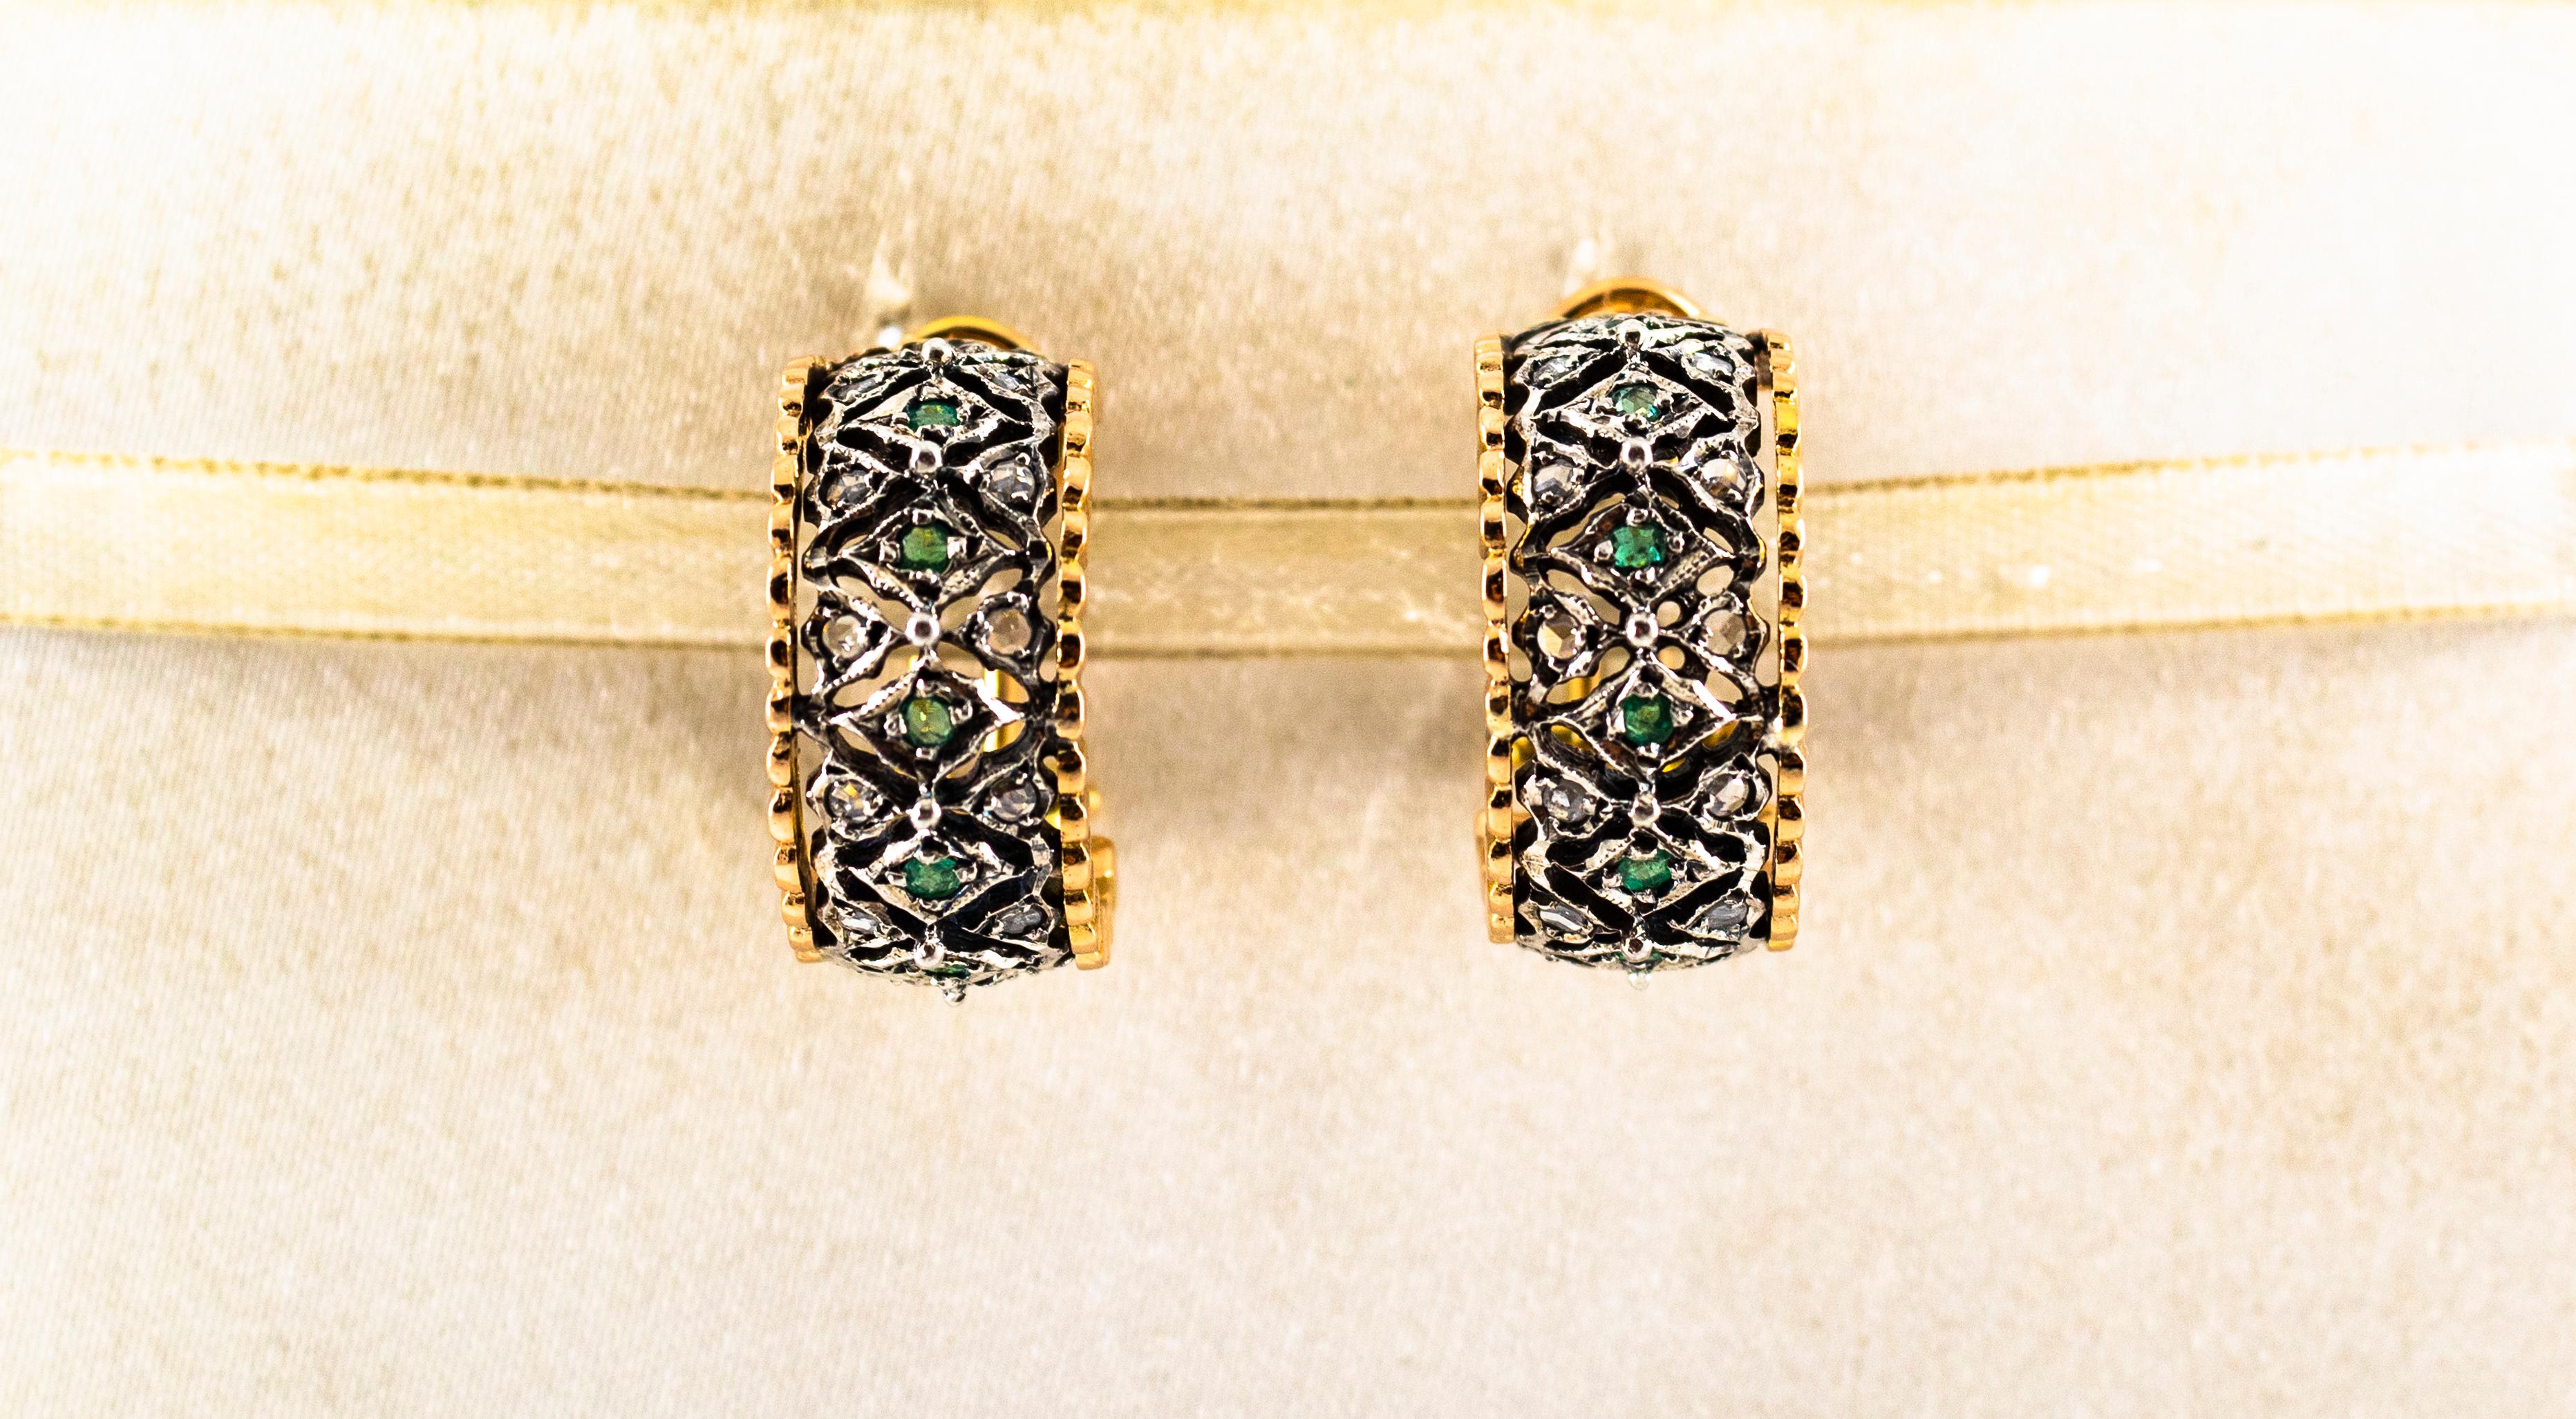 These Earrings are made of 9K Yellow Gold and Sterling Silver.
These Earrings have 0.48 Carats of White Rose Cut Diamonds.
These Earrings have 0.28 Carat of Emeralds.

All our Earrings have pins for pierced ears but we can change the closure and